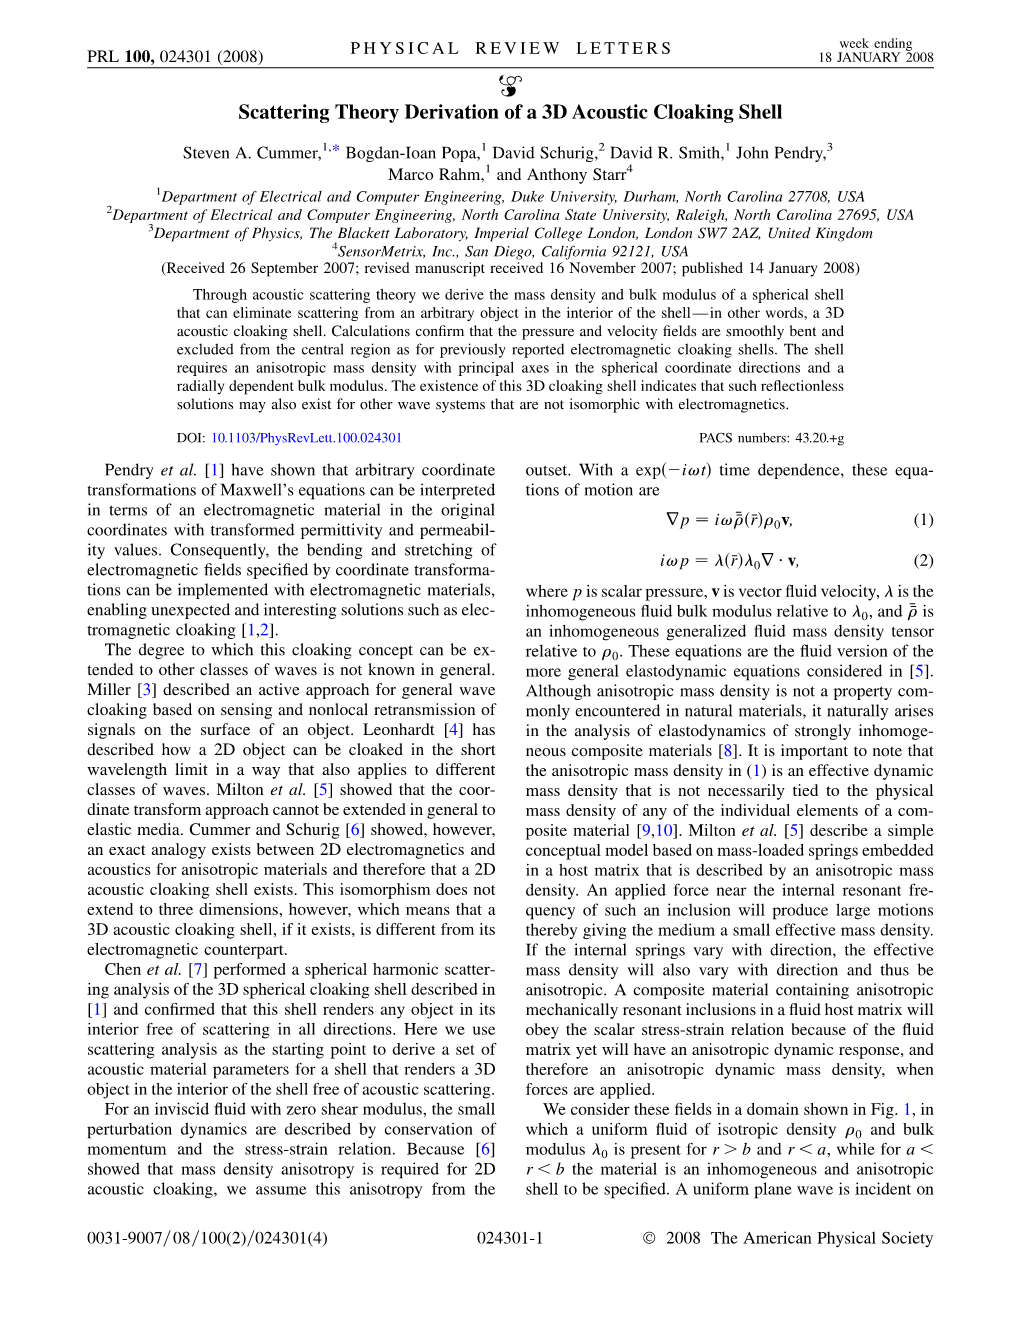 Scattering Theory Derivation of a 3D Acoustic Cloaking Shell